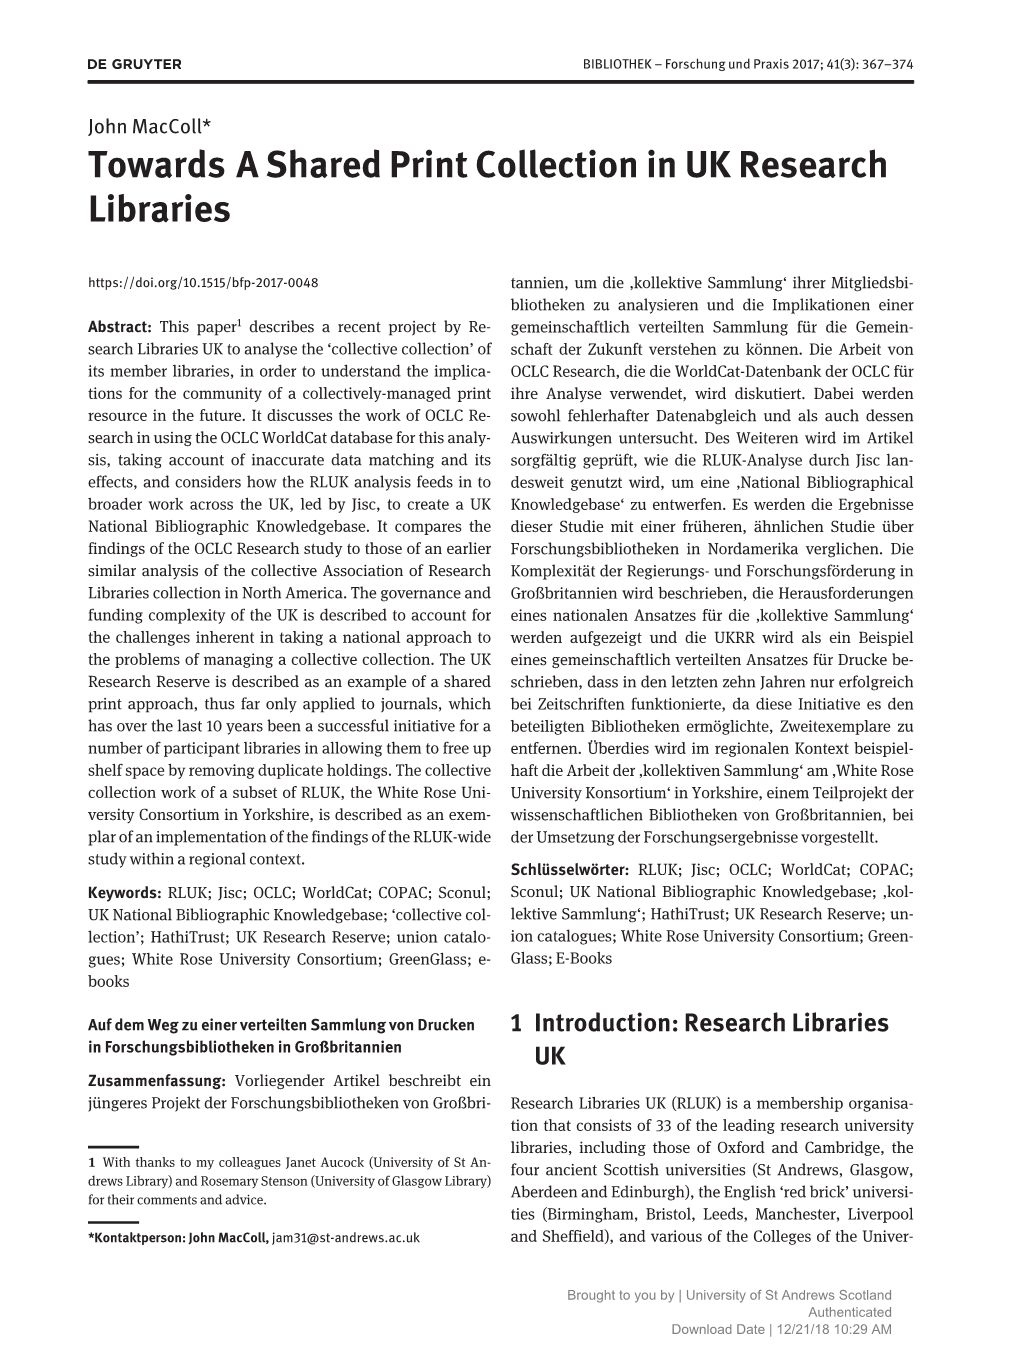 Towards a Shared Print Collection in UK Research Libraries